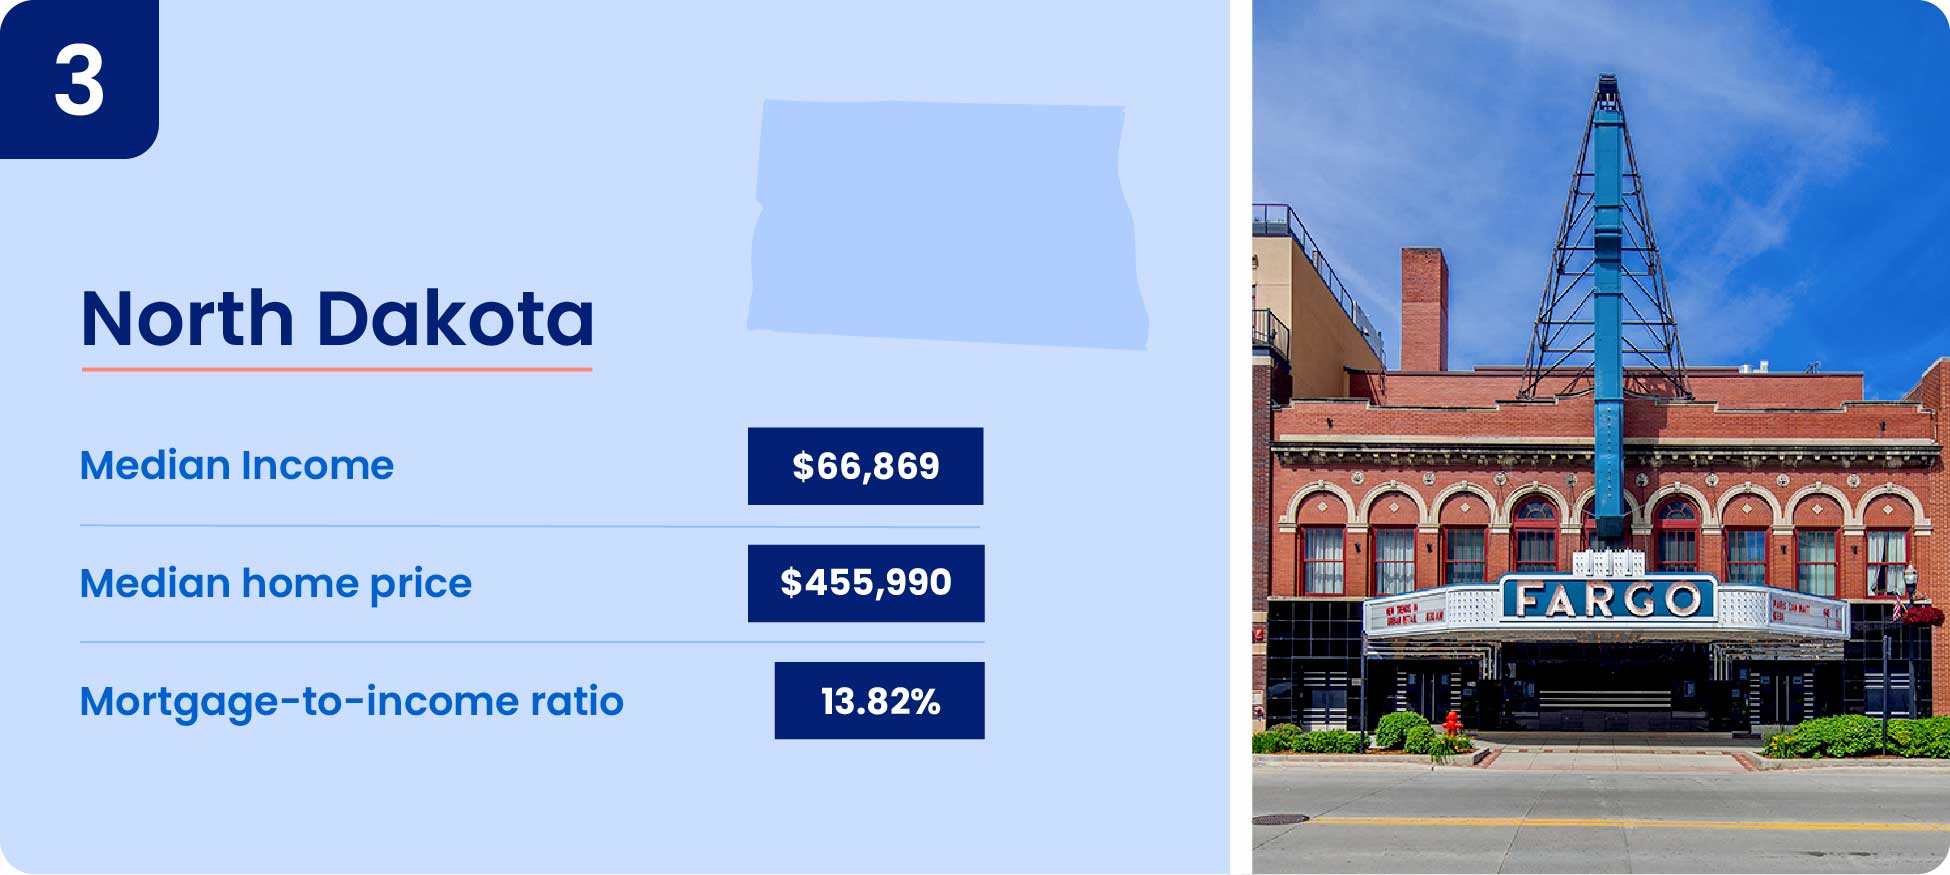 Image shows why one of the cheapest states to buy a house is North Dakota.